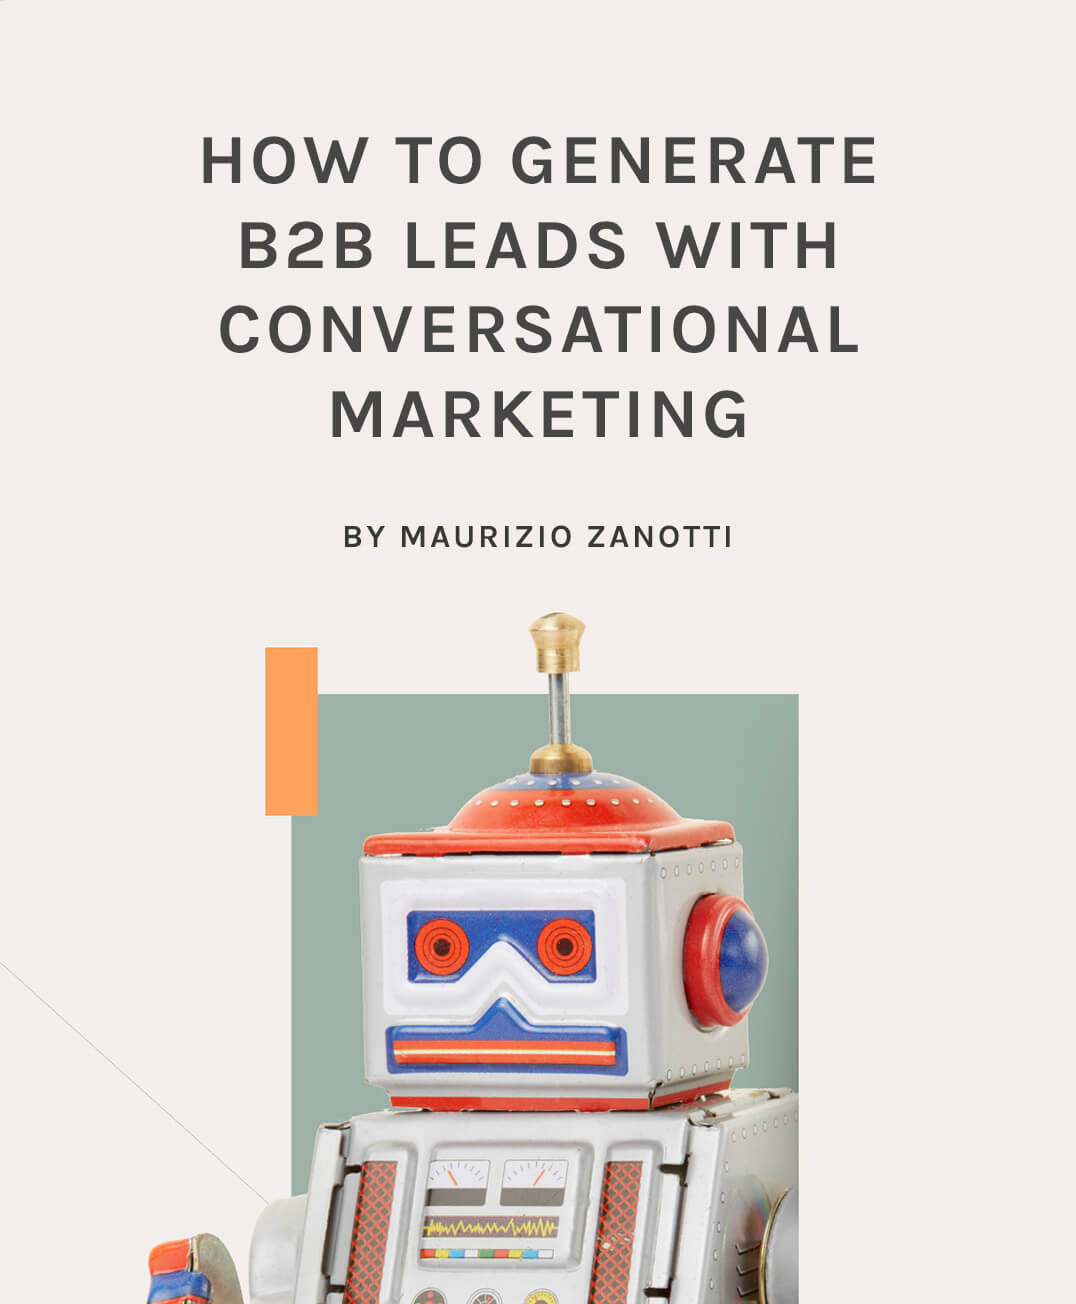 How To Generate B2B Leads With Conversational Marketing